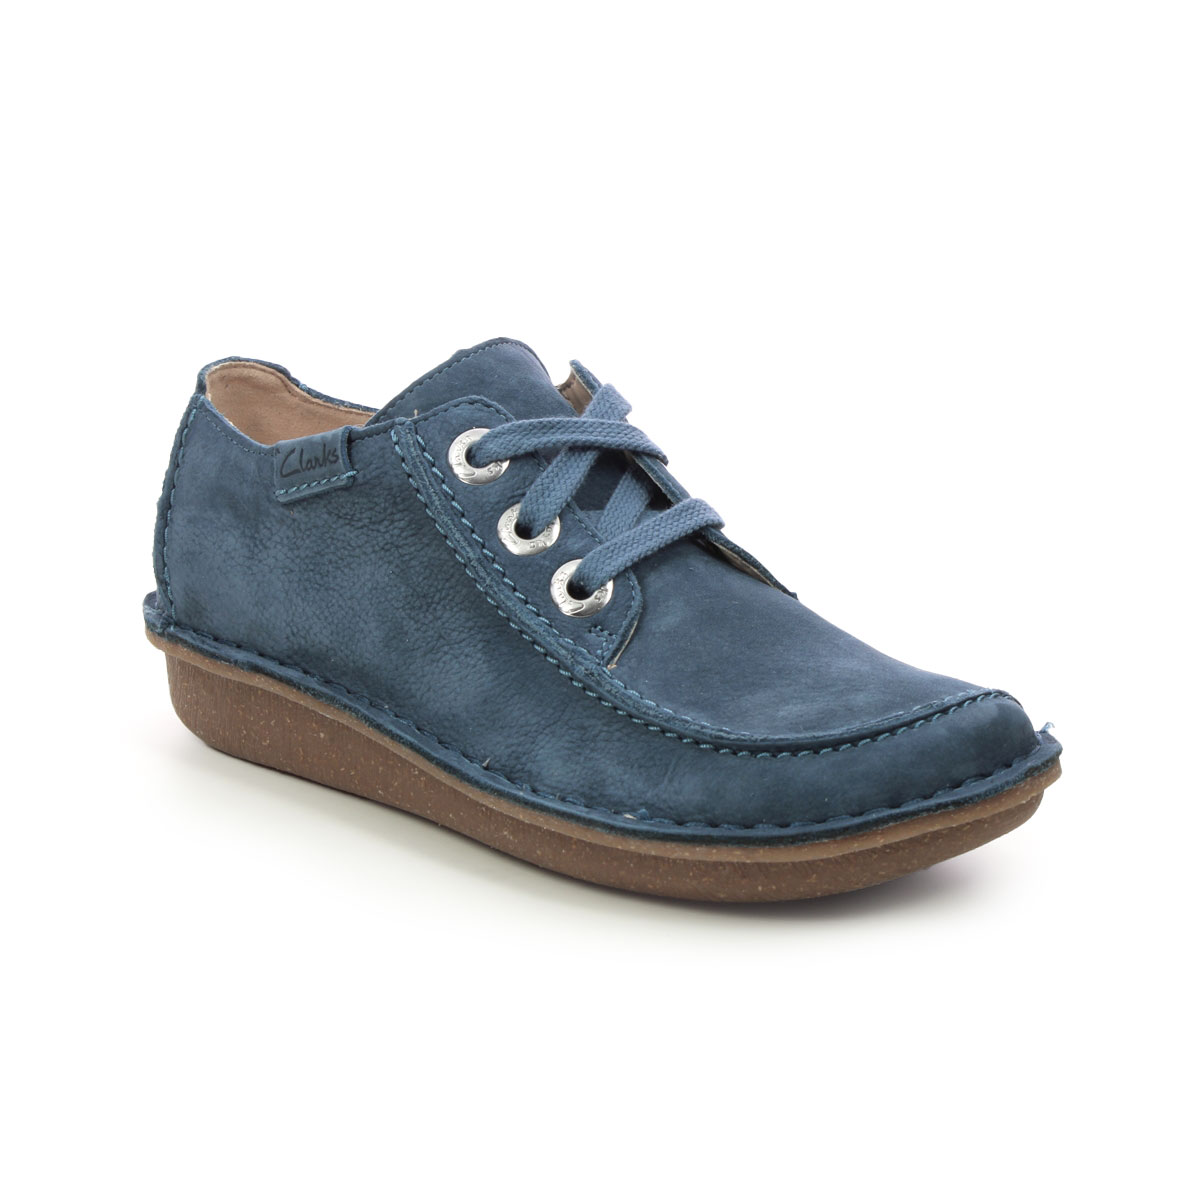 Clarks Funny Dream Blue nubuck Womens lacing shoes 7628-84D in a Plain Leather in Size 7.5